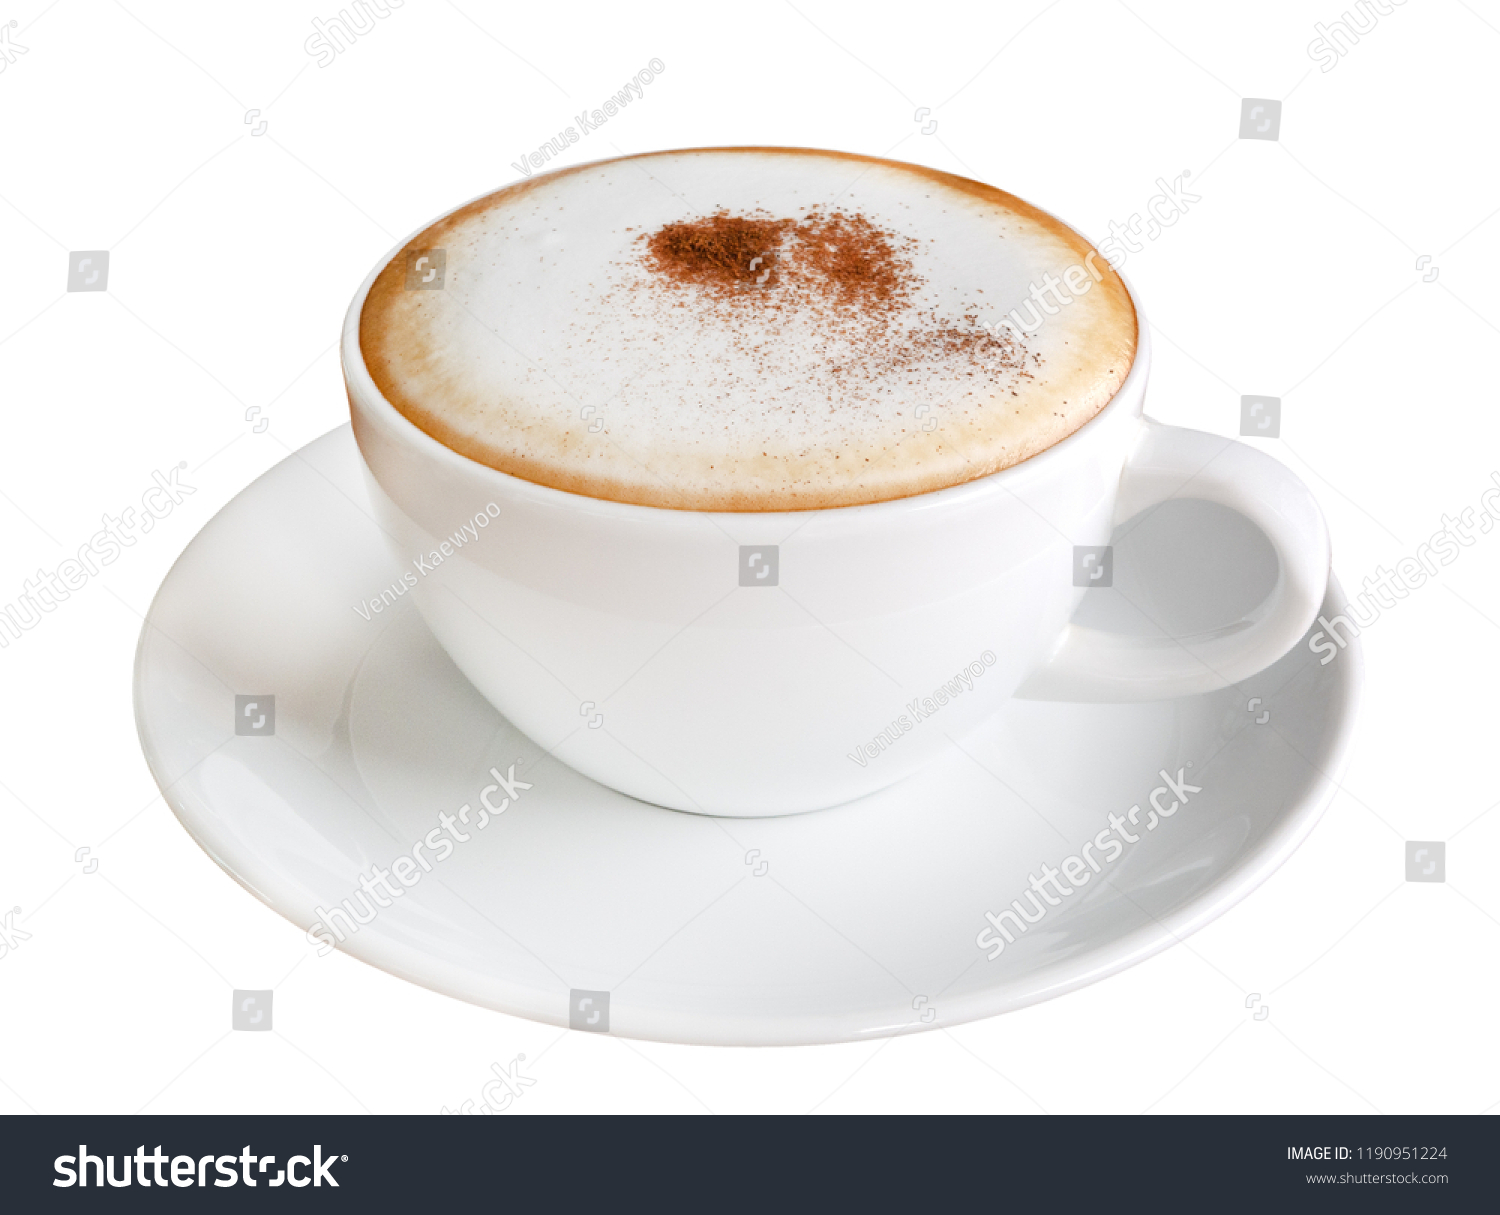 Hot coffee cappuccino in ceramic cup isolated on white background, clipping path included #1190951224